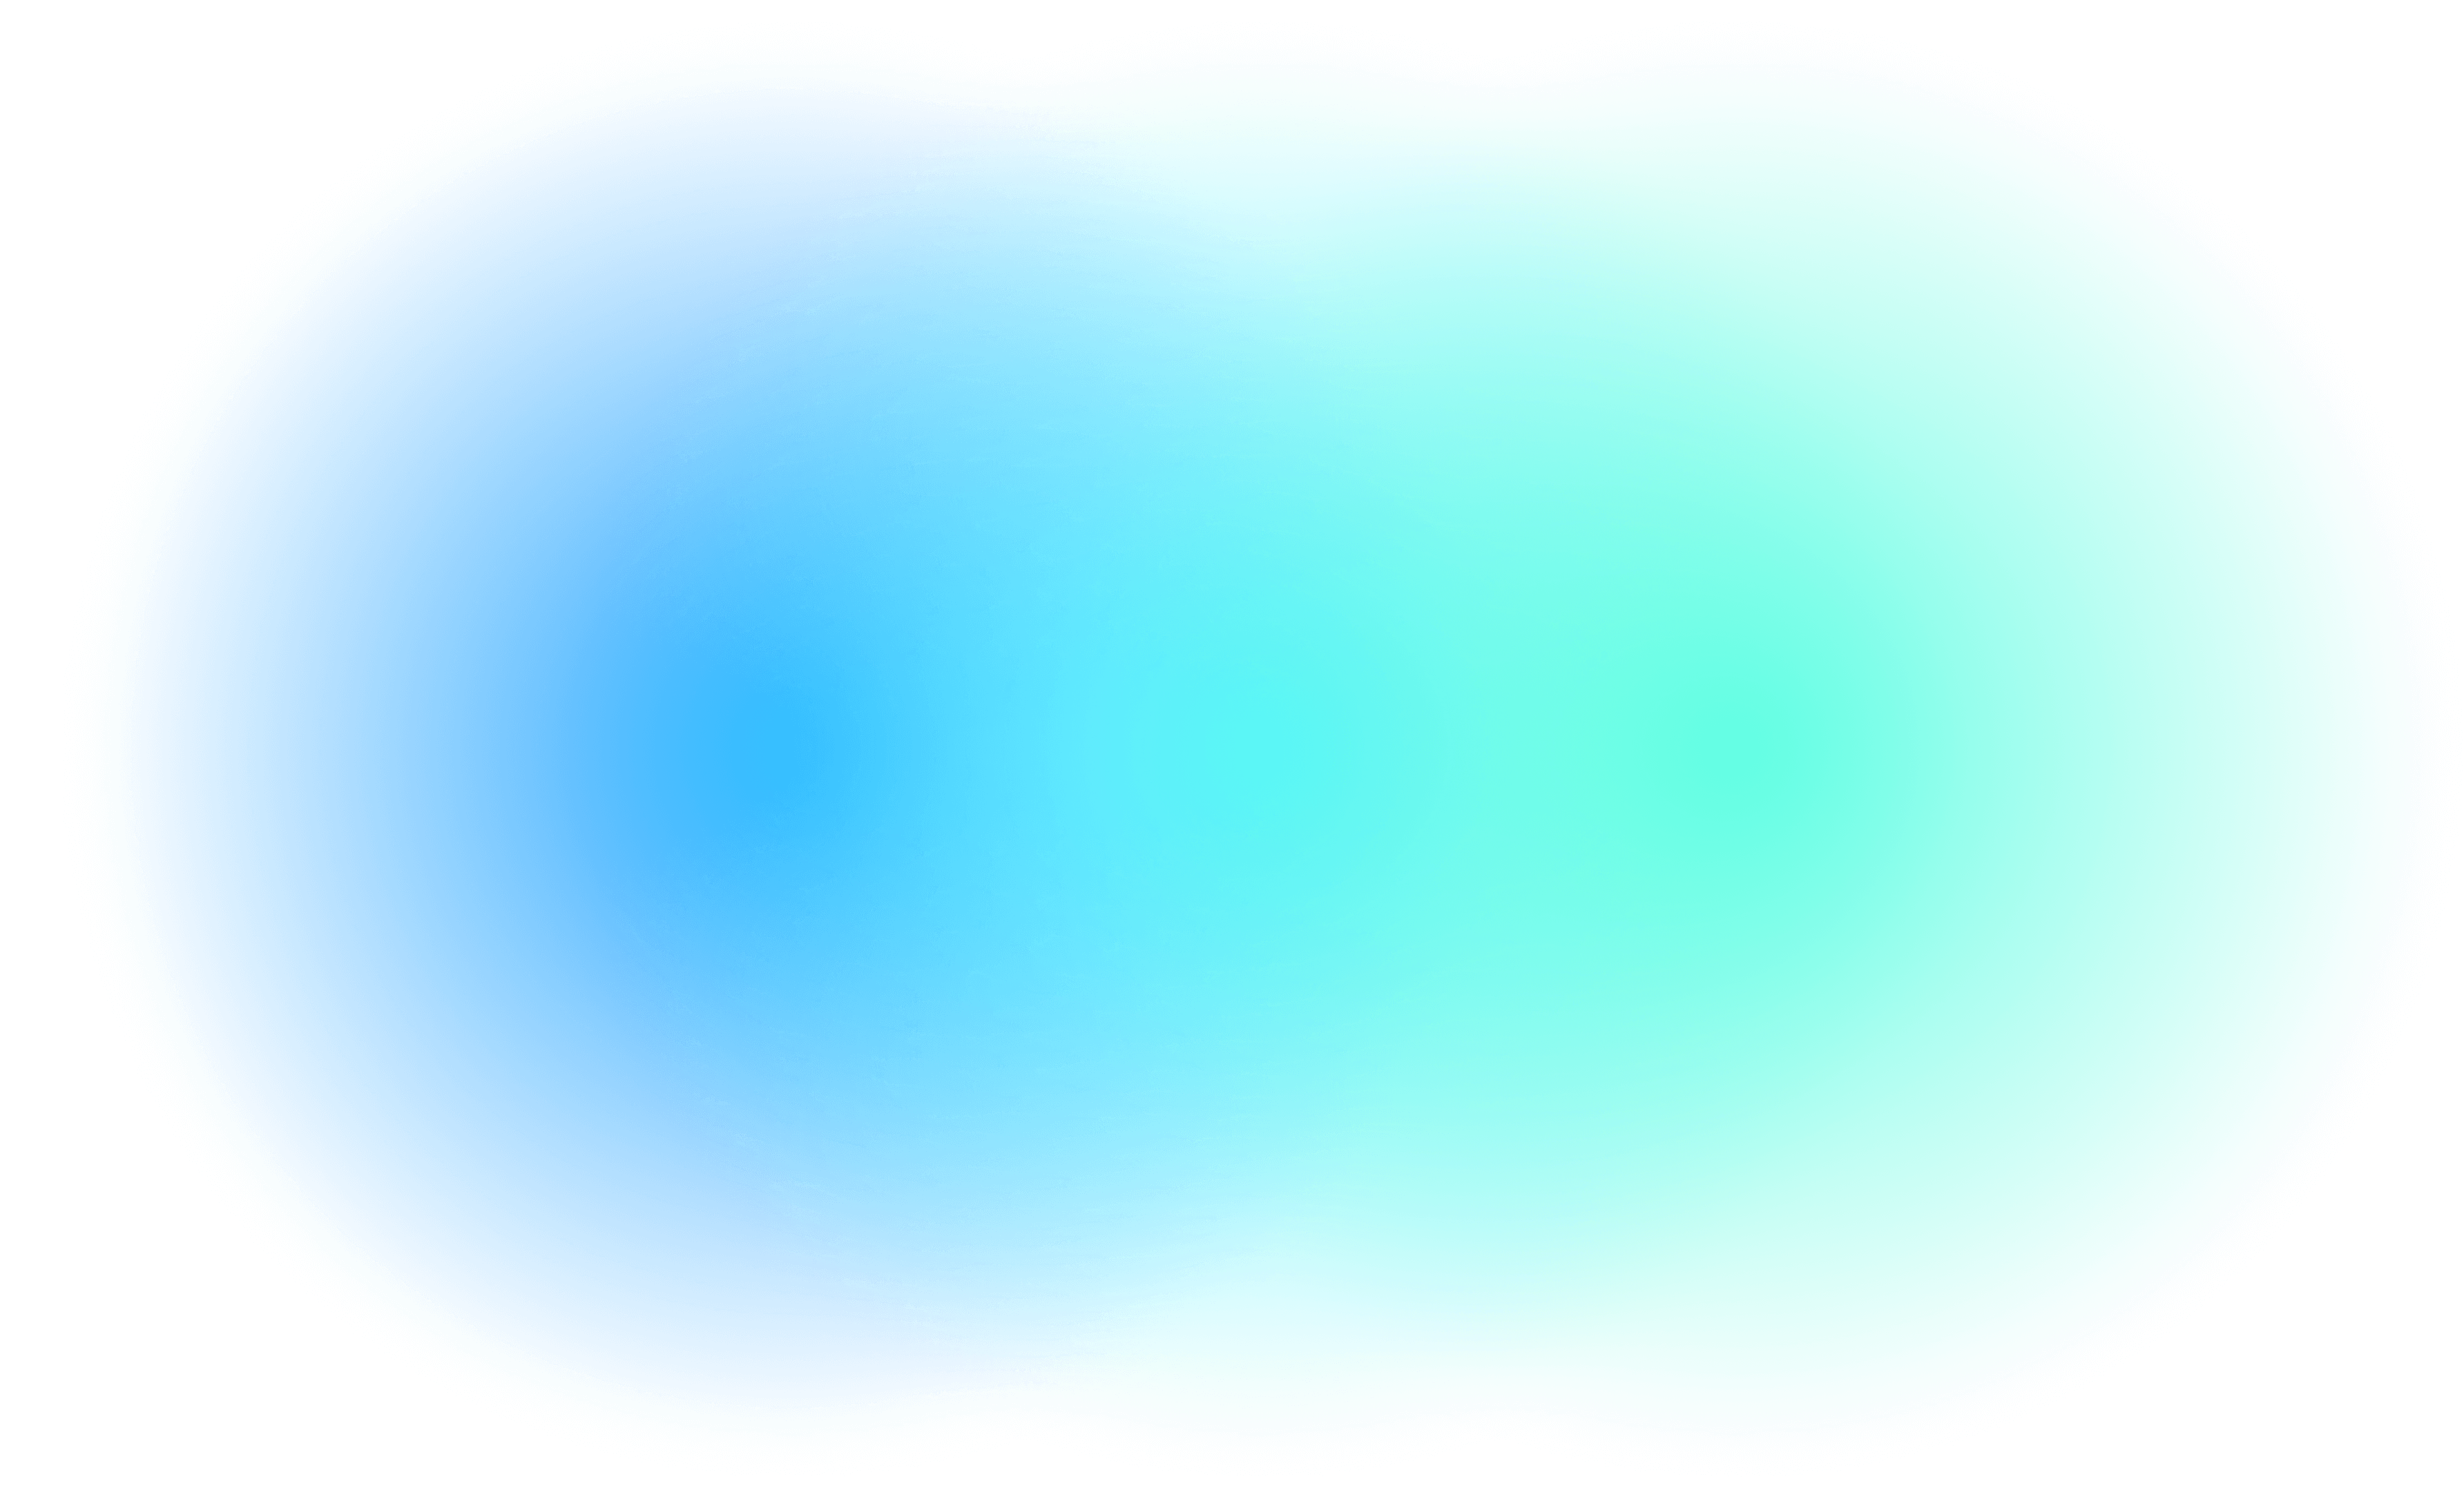 gradient background of cool blue and aqua colors